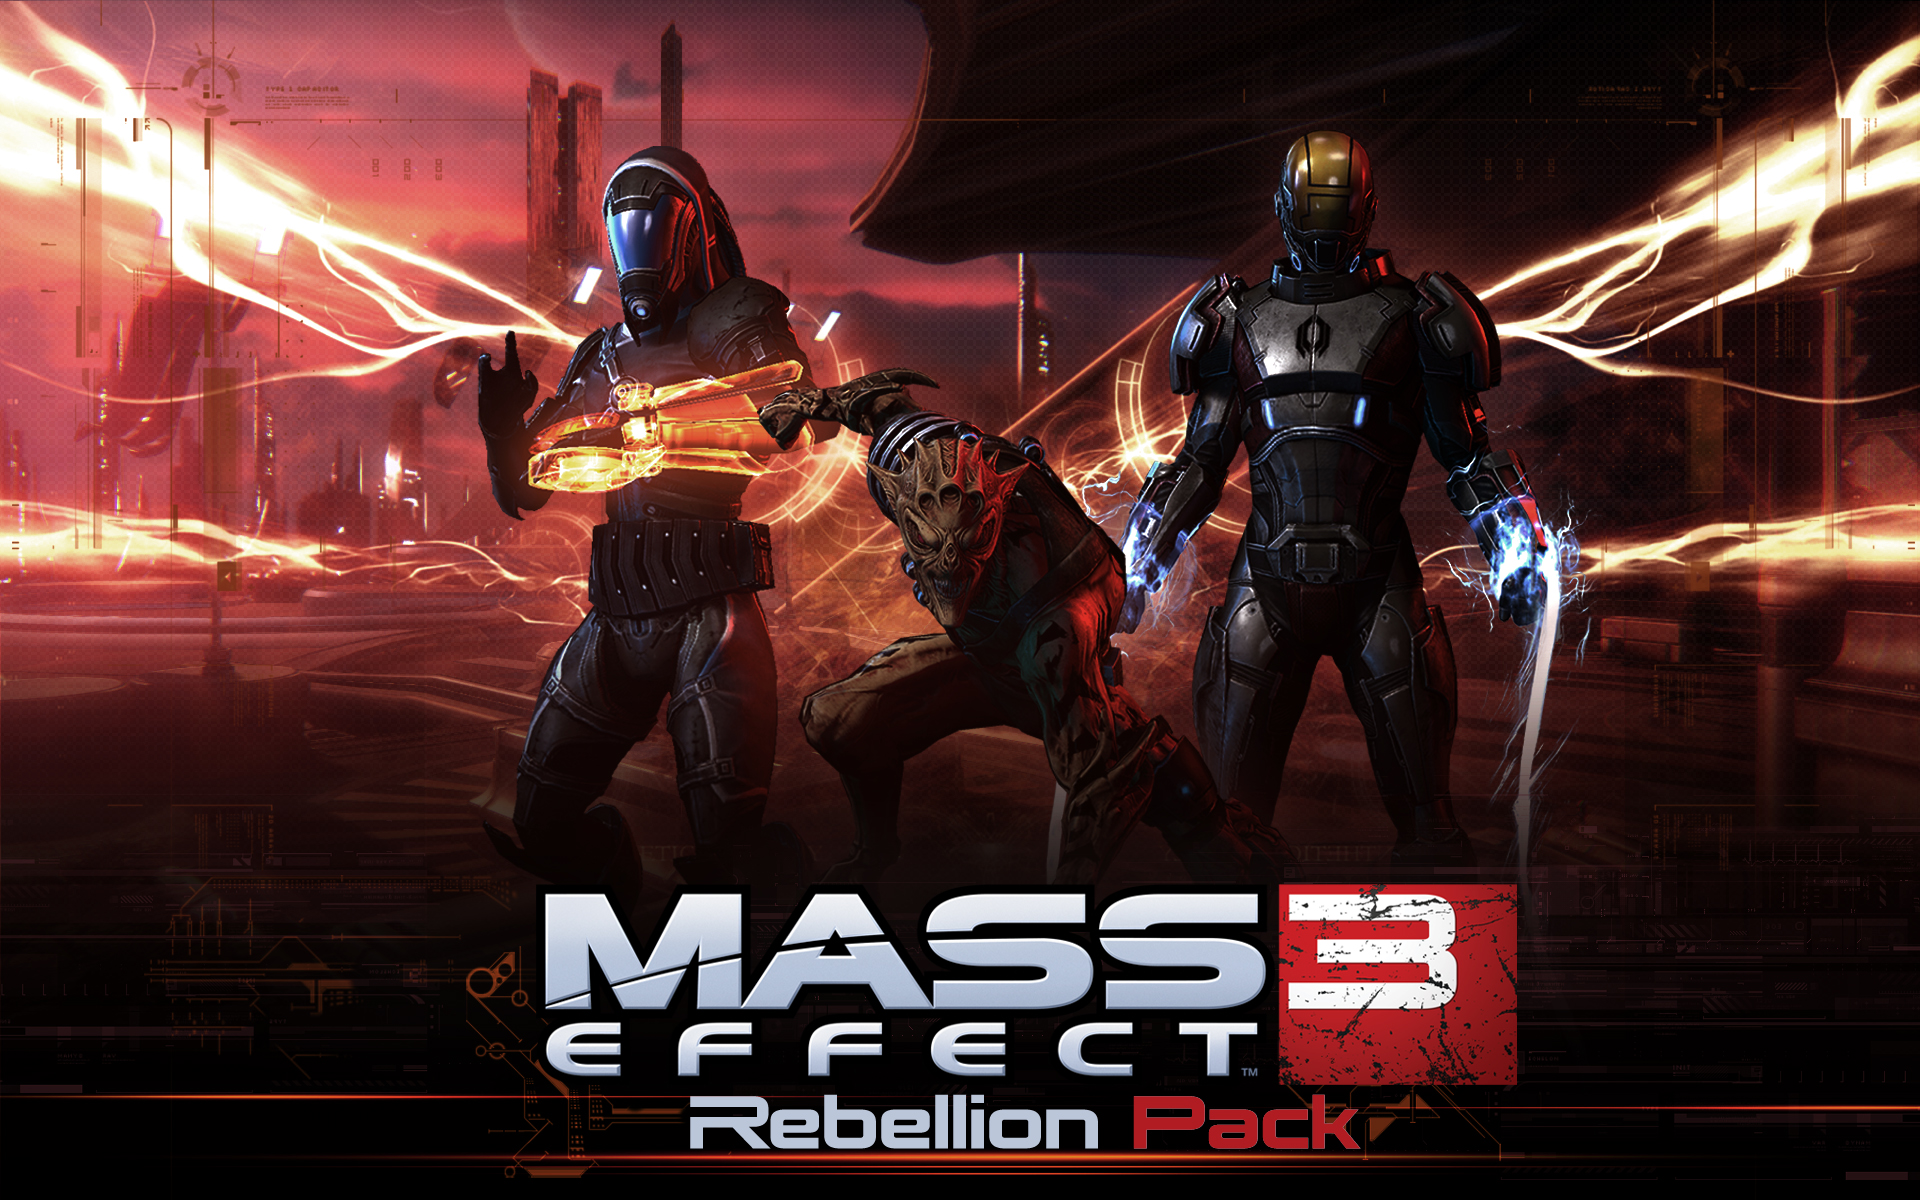 Media asset in full size related to 3dfxzone.it news item entitled as follows: BioWare annuncia il DLC Rebellion per il game Mass Effect 3 | Image Name: news17298_1.jpg